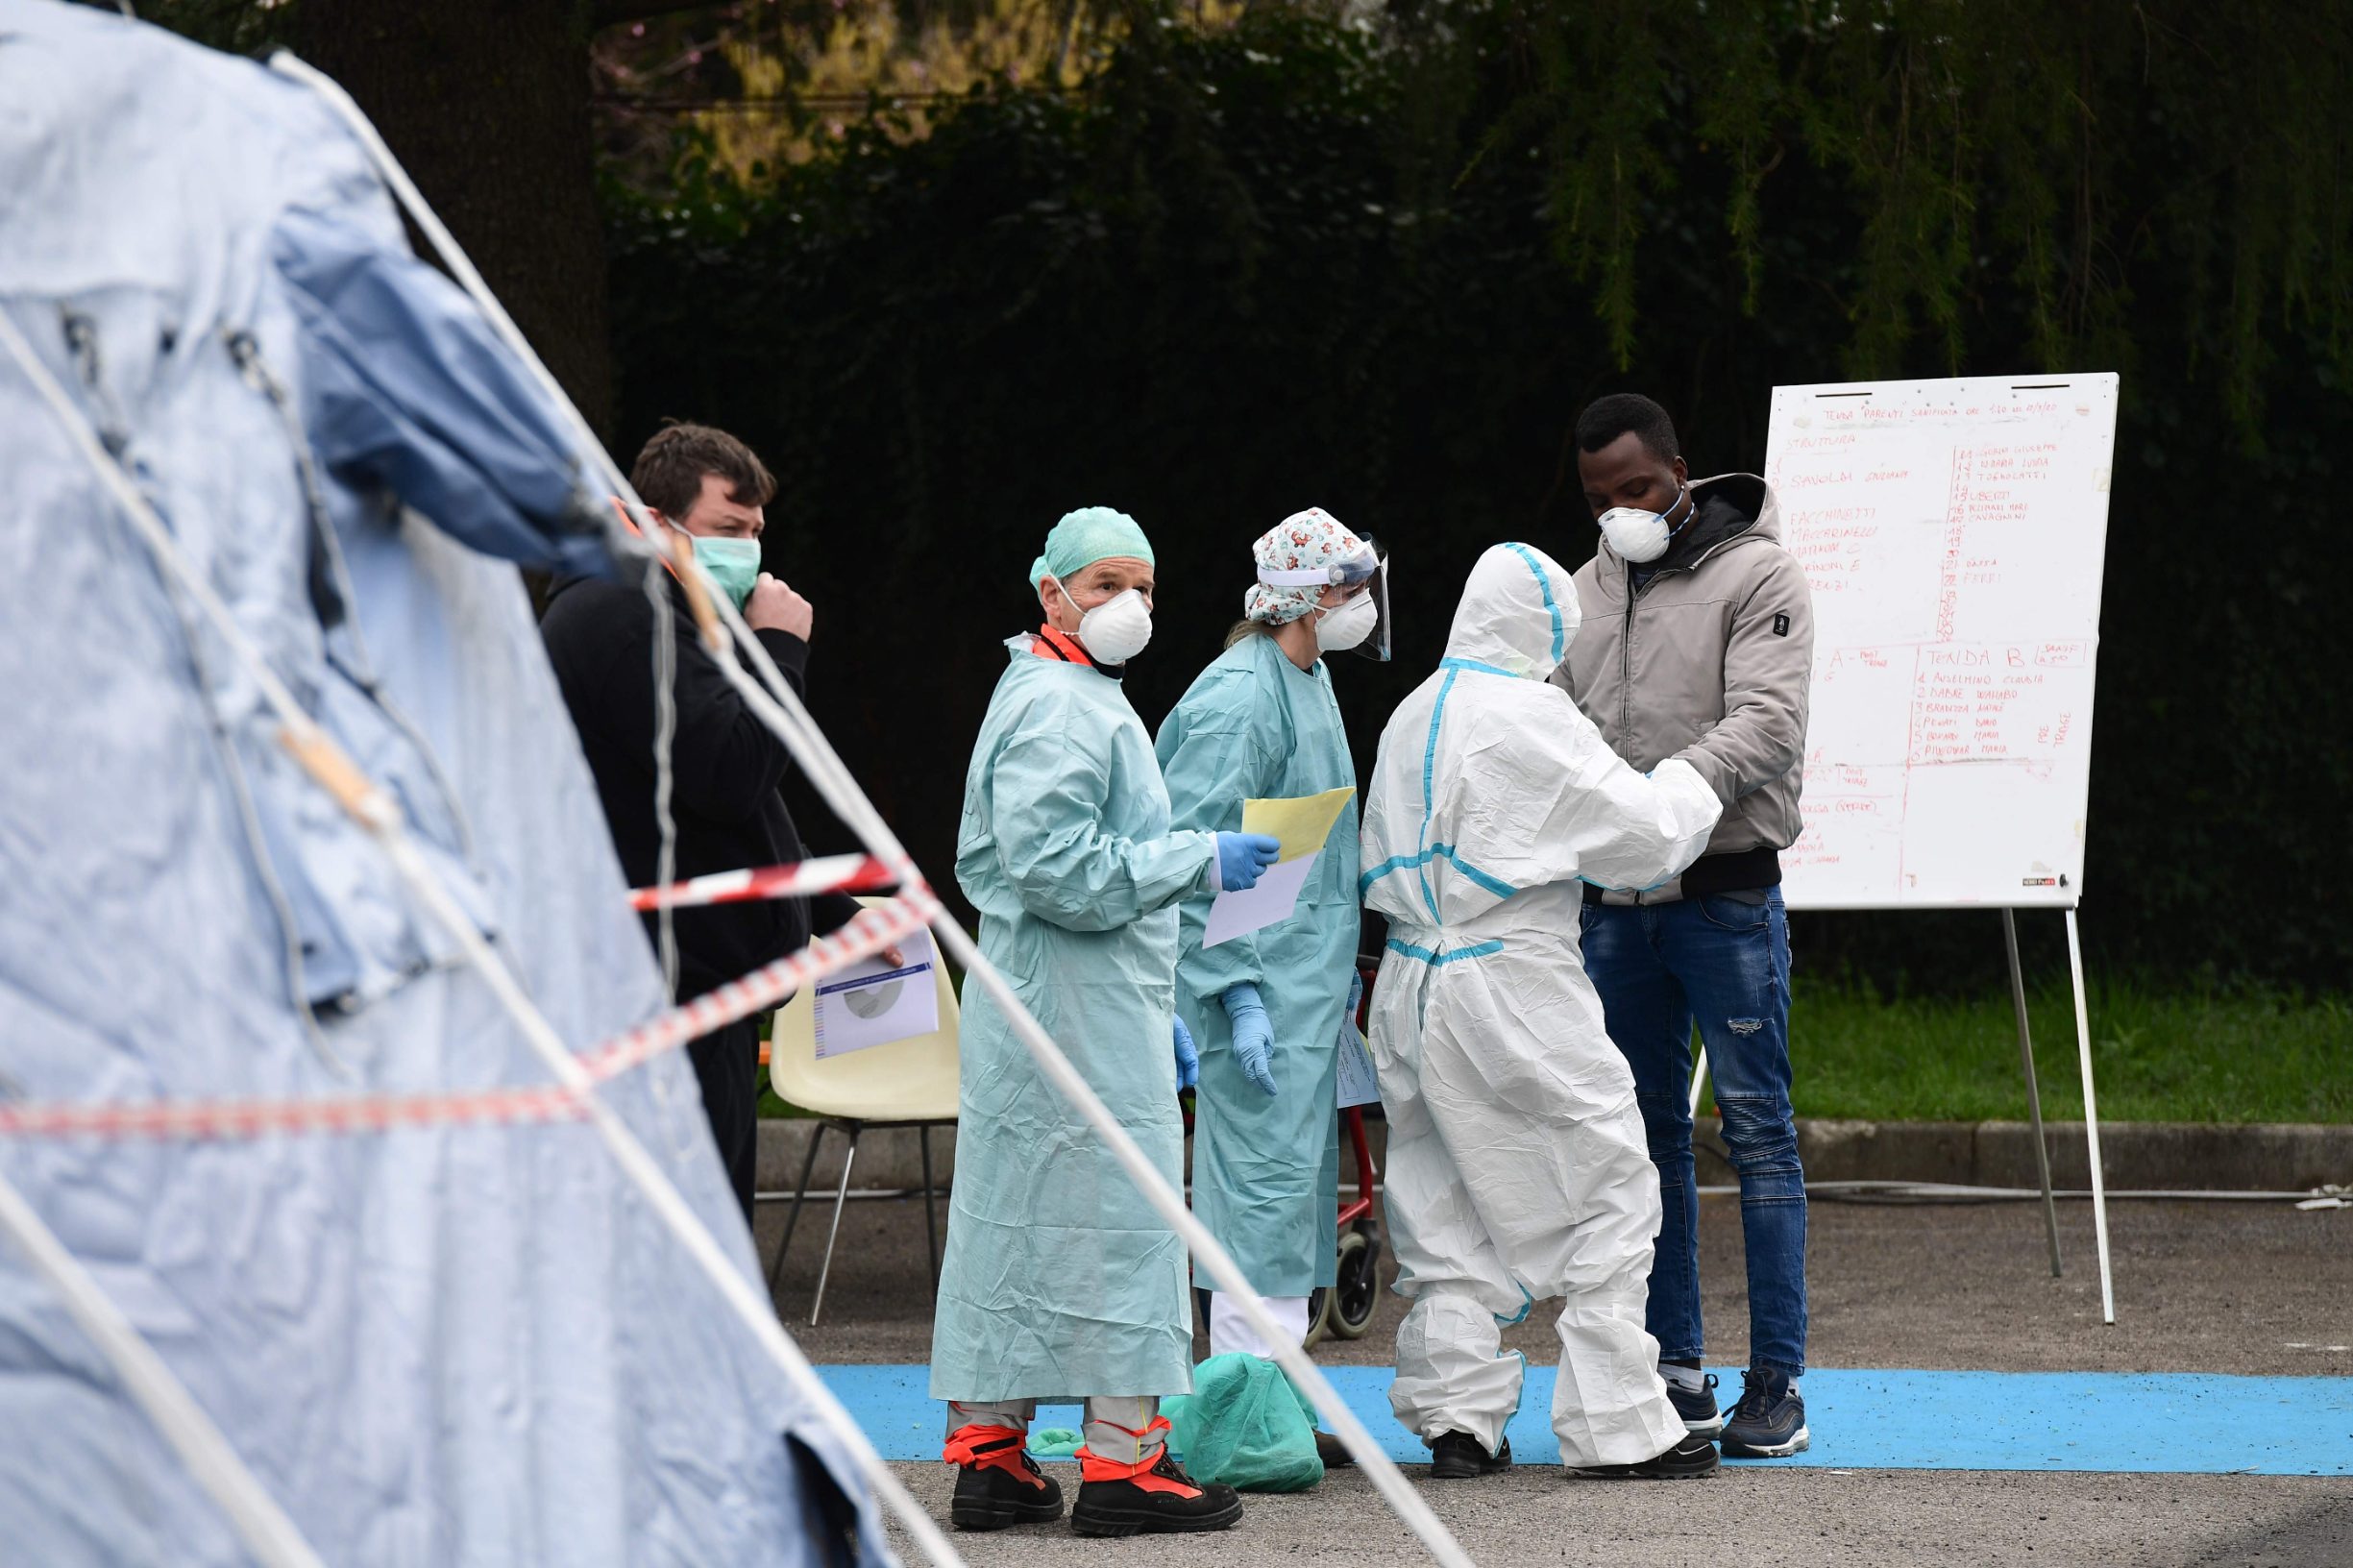 Hospital employees wearing a protection mask and gear tend to a patient (R) coming in to be tested at a temporary emergency structure set up outside the accident and emergency department, where any new arrivals presenting suspect new coronavirus symptoms are being tested, at the Brescia hospital, Lombardy, on March 13, 2020. (Photo by Miguel MEDINA / AFP)